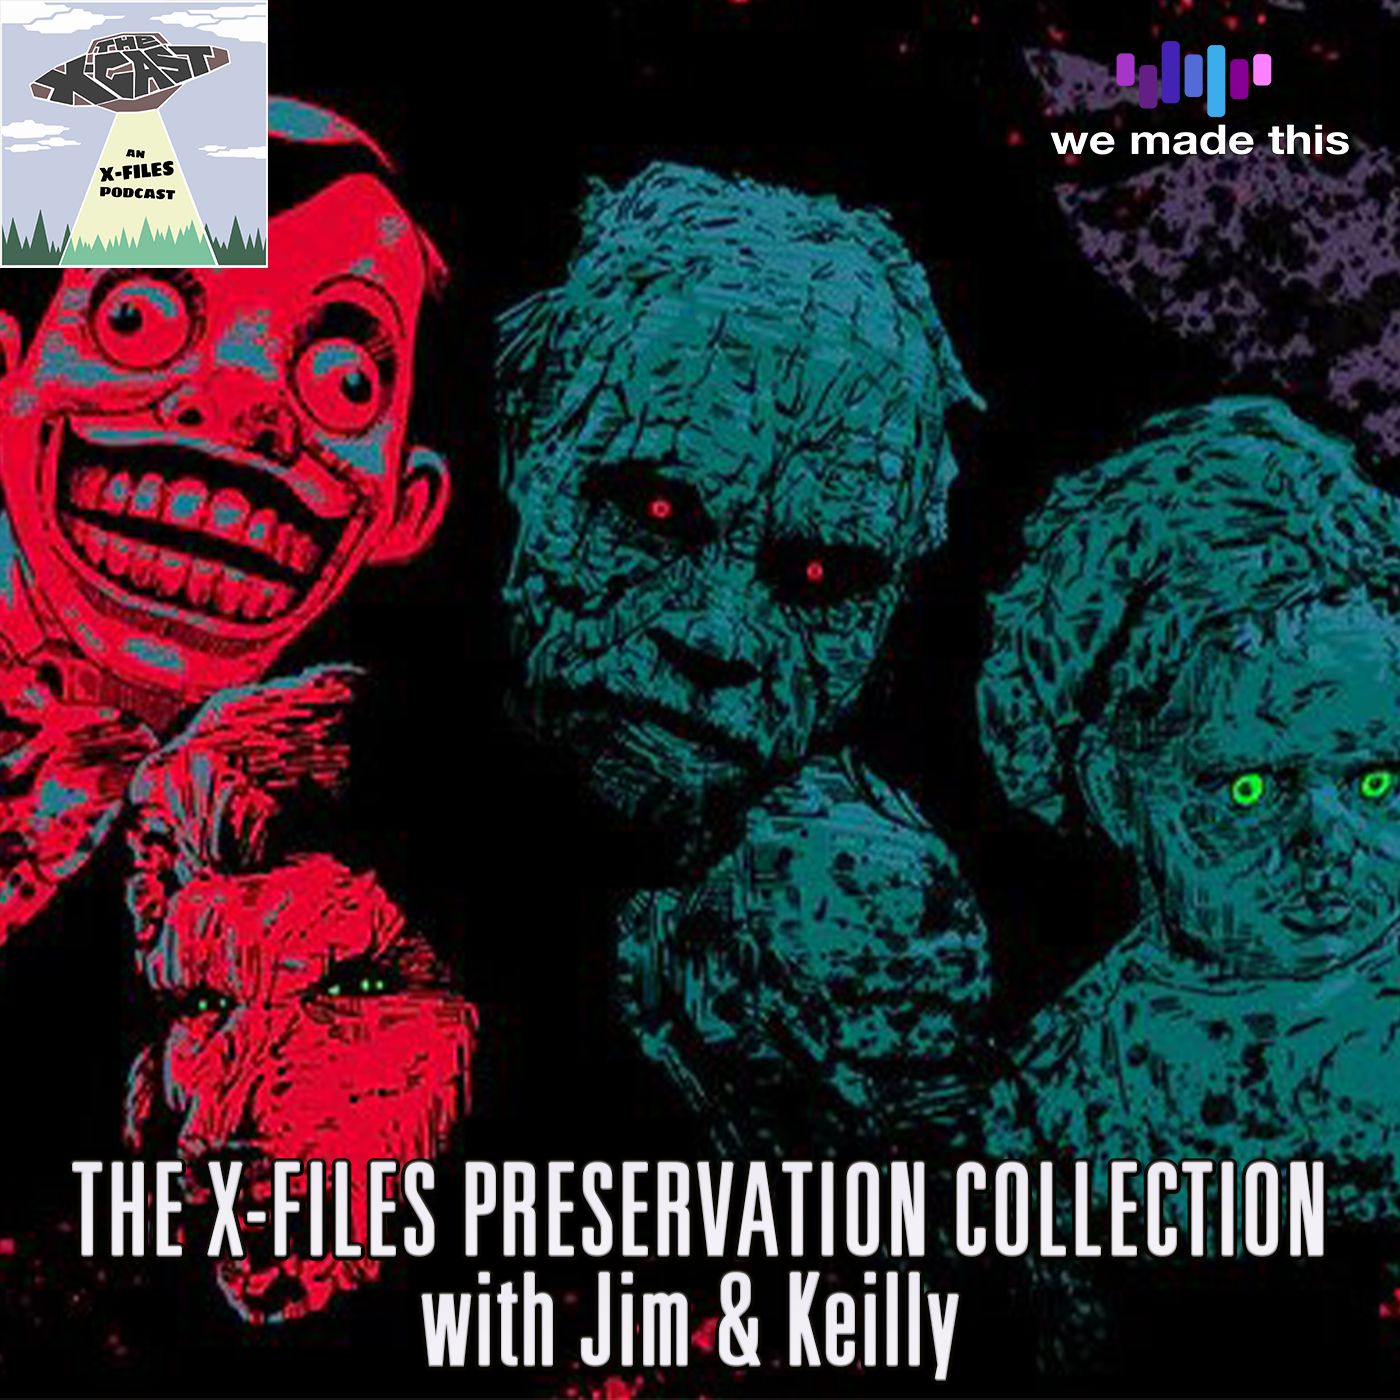 607. The X-Files Preservation Collection